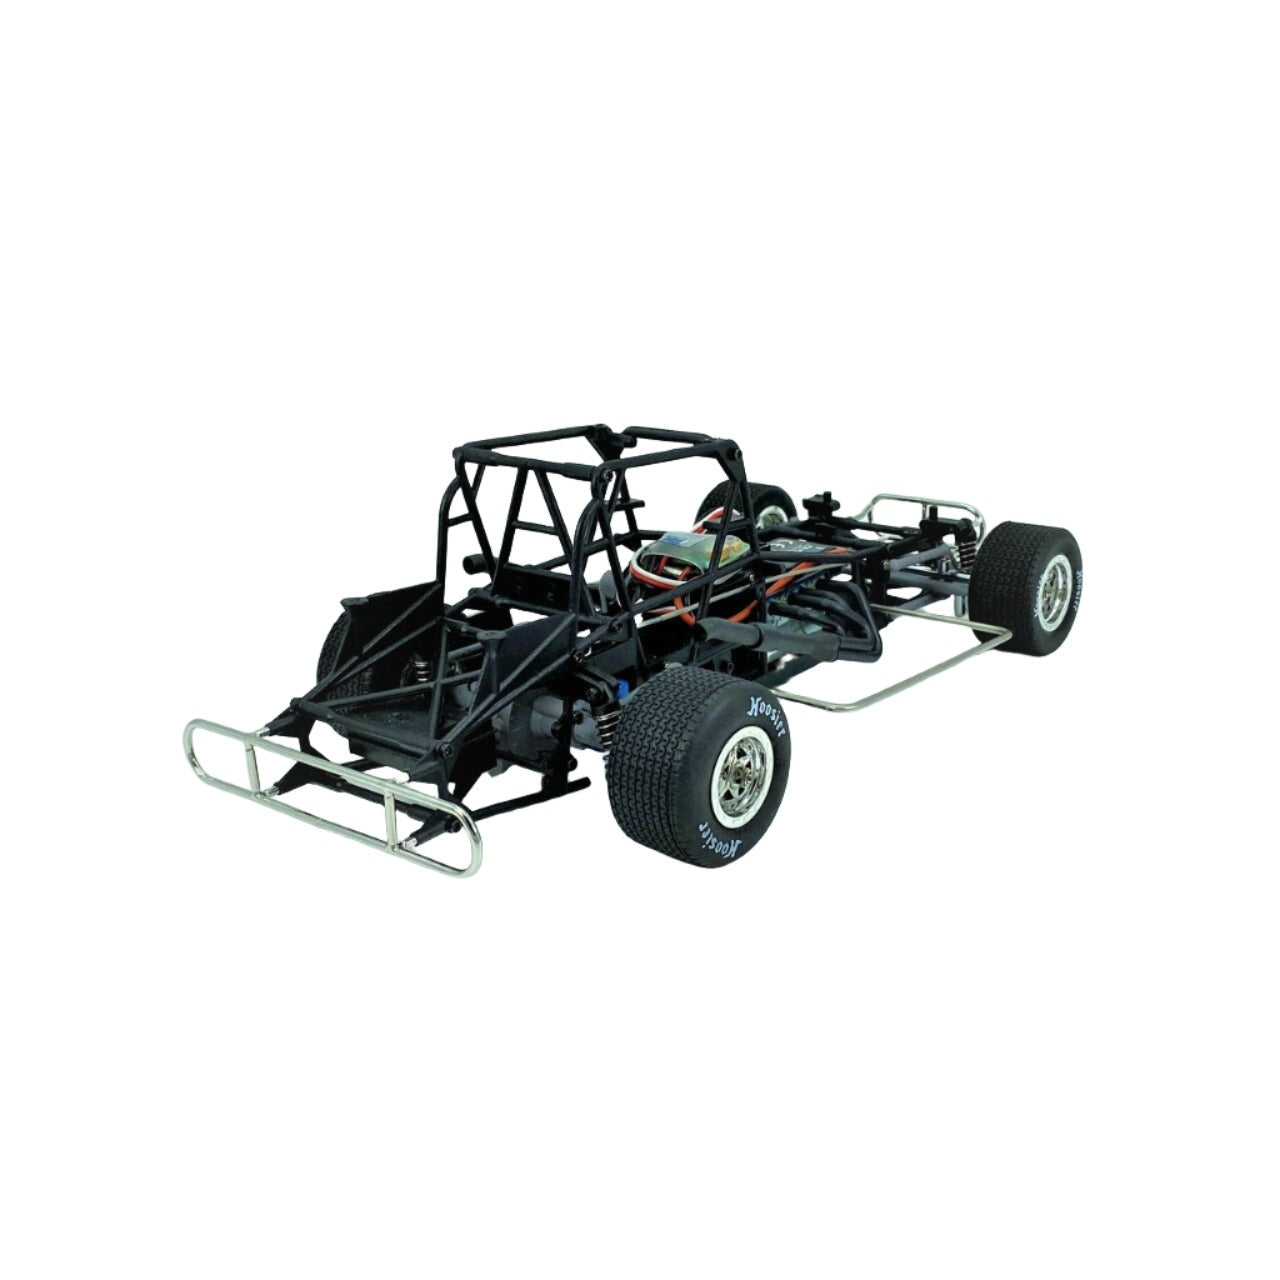 1/18 Scale 1RC Modified, Clear, RTR